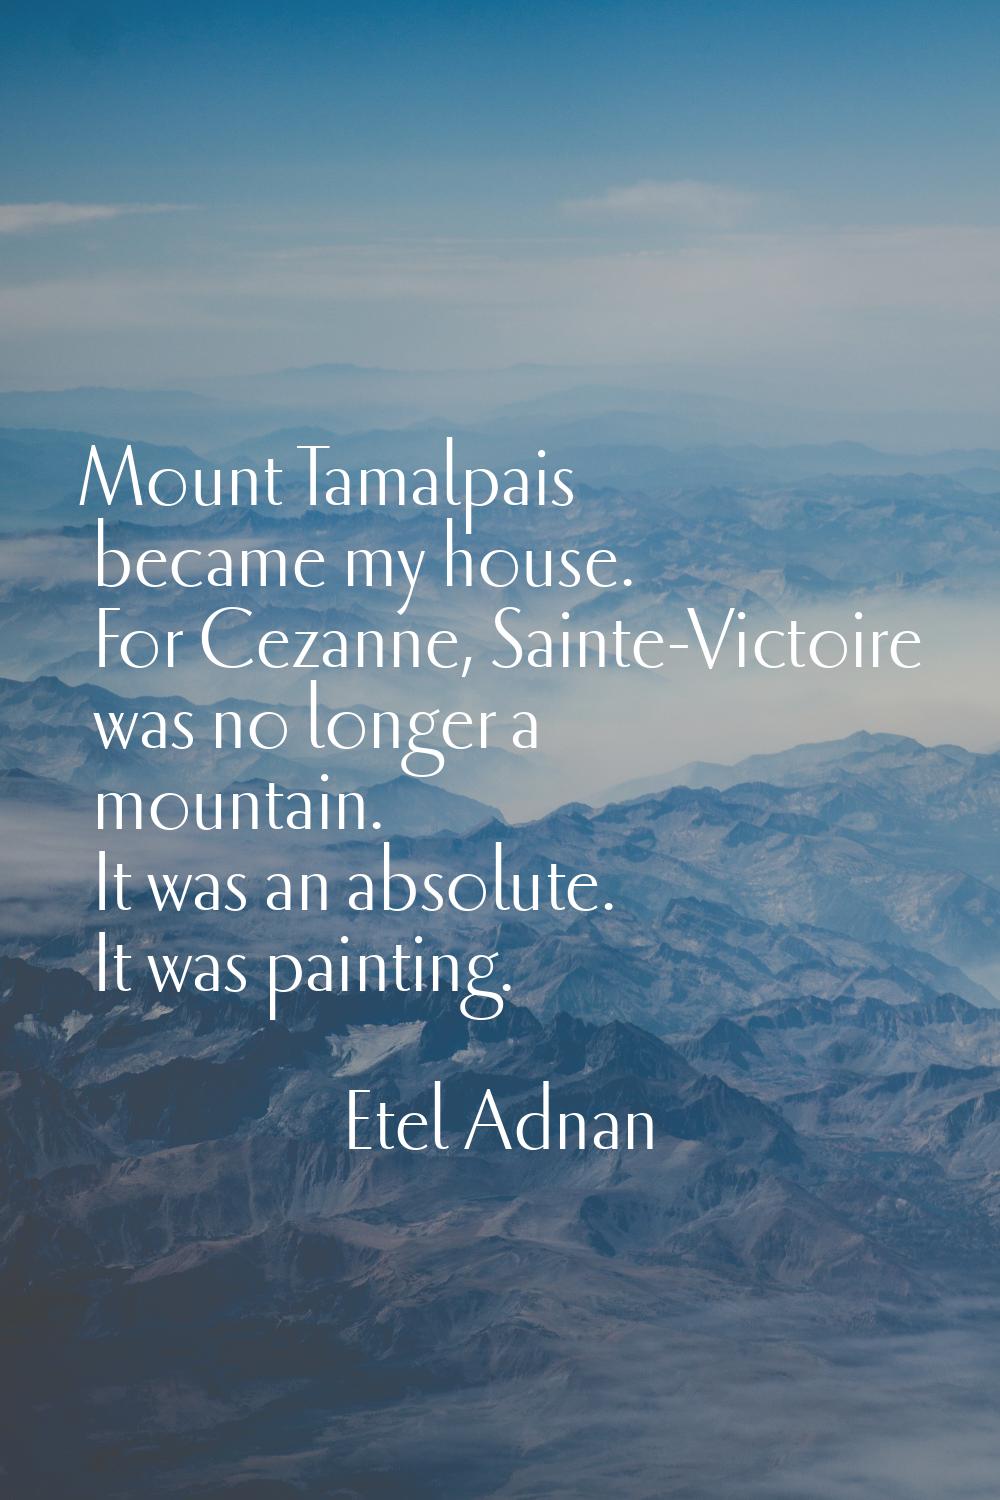 Mount Tamalpais became my house. For Cezanne, Sainte-Victoire was no longer a mountain. It was an a